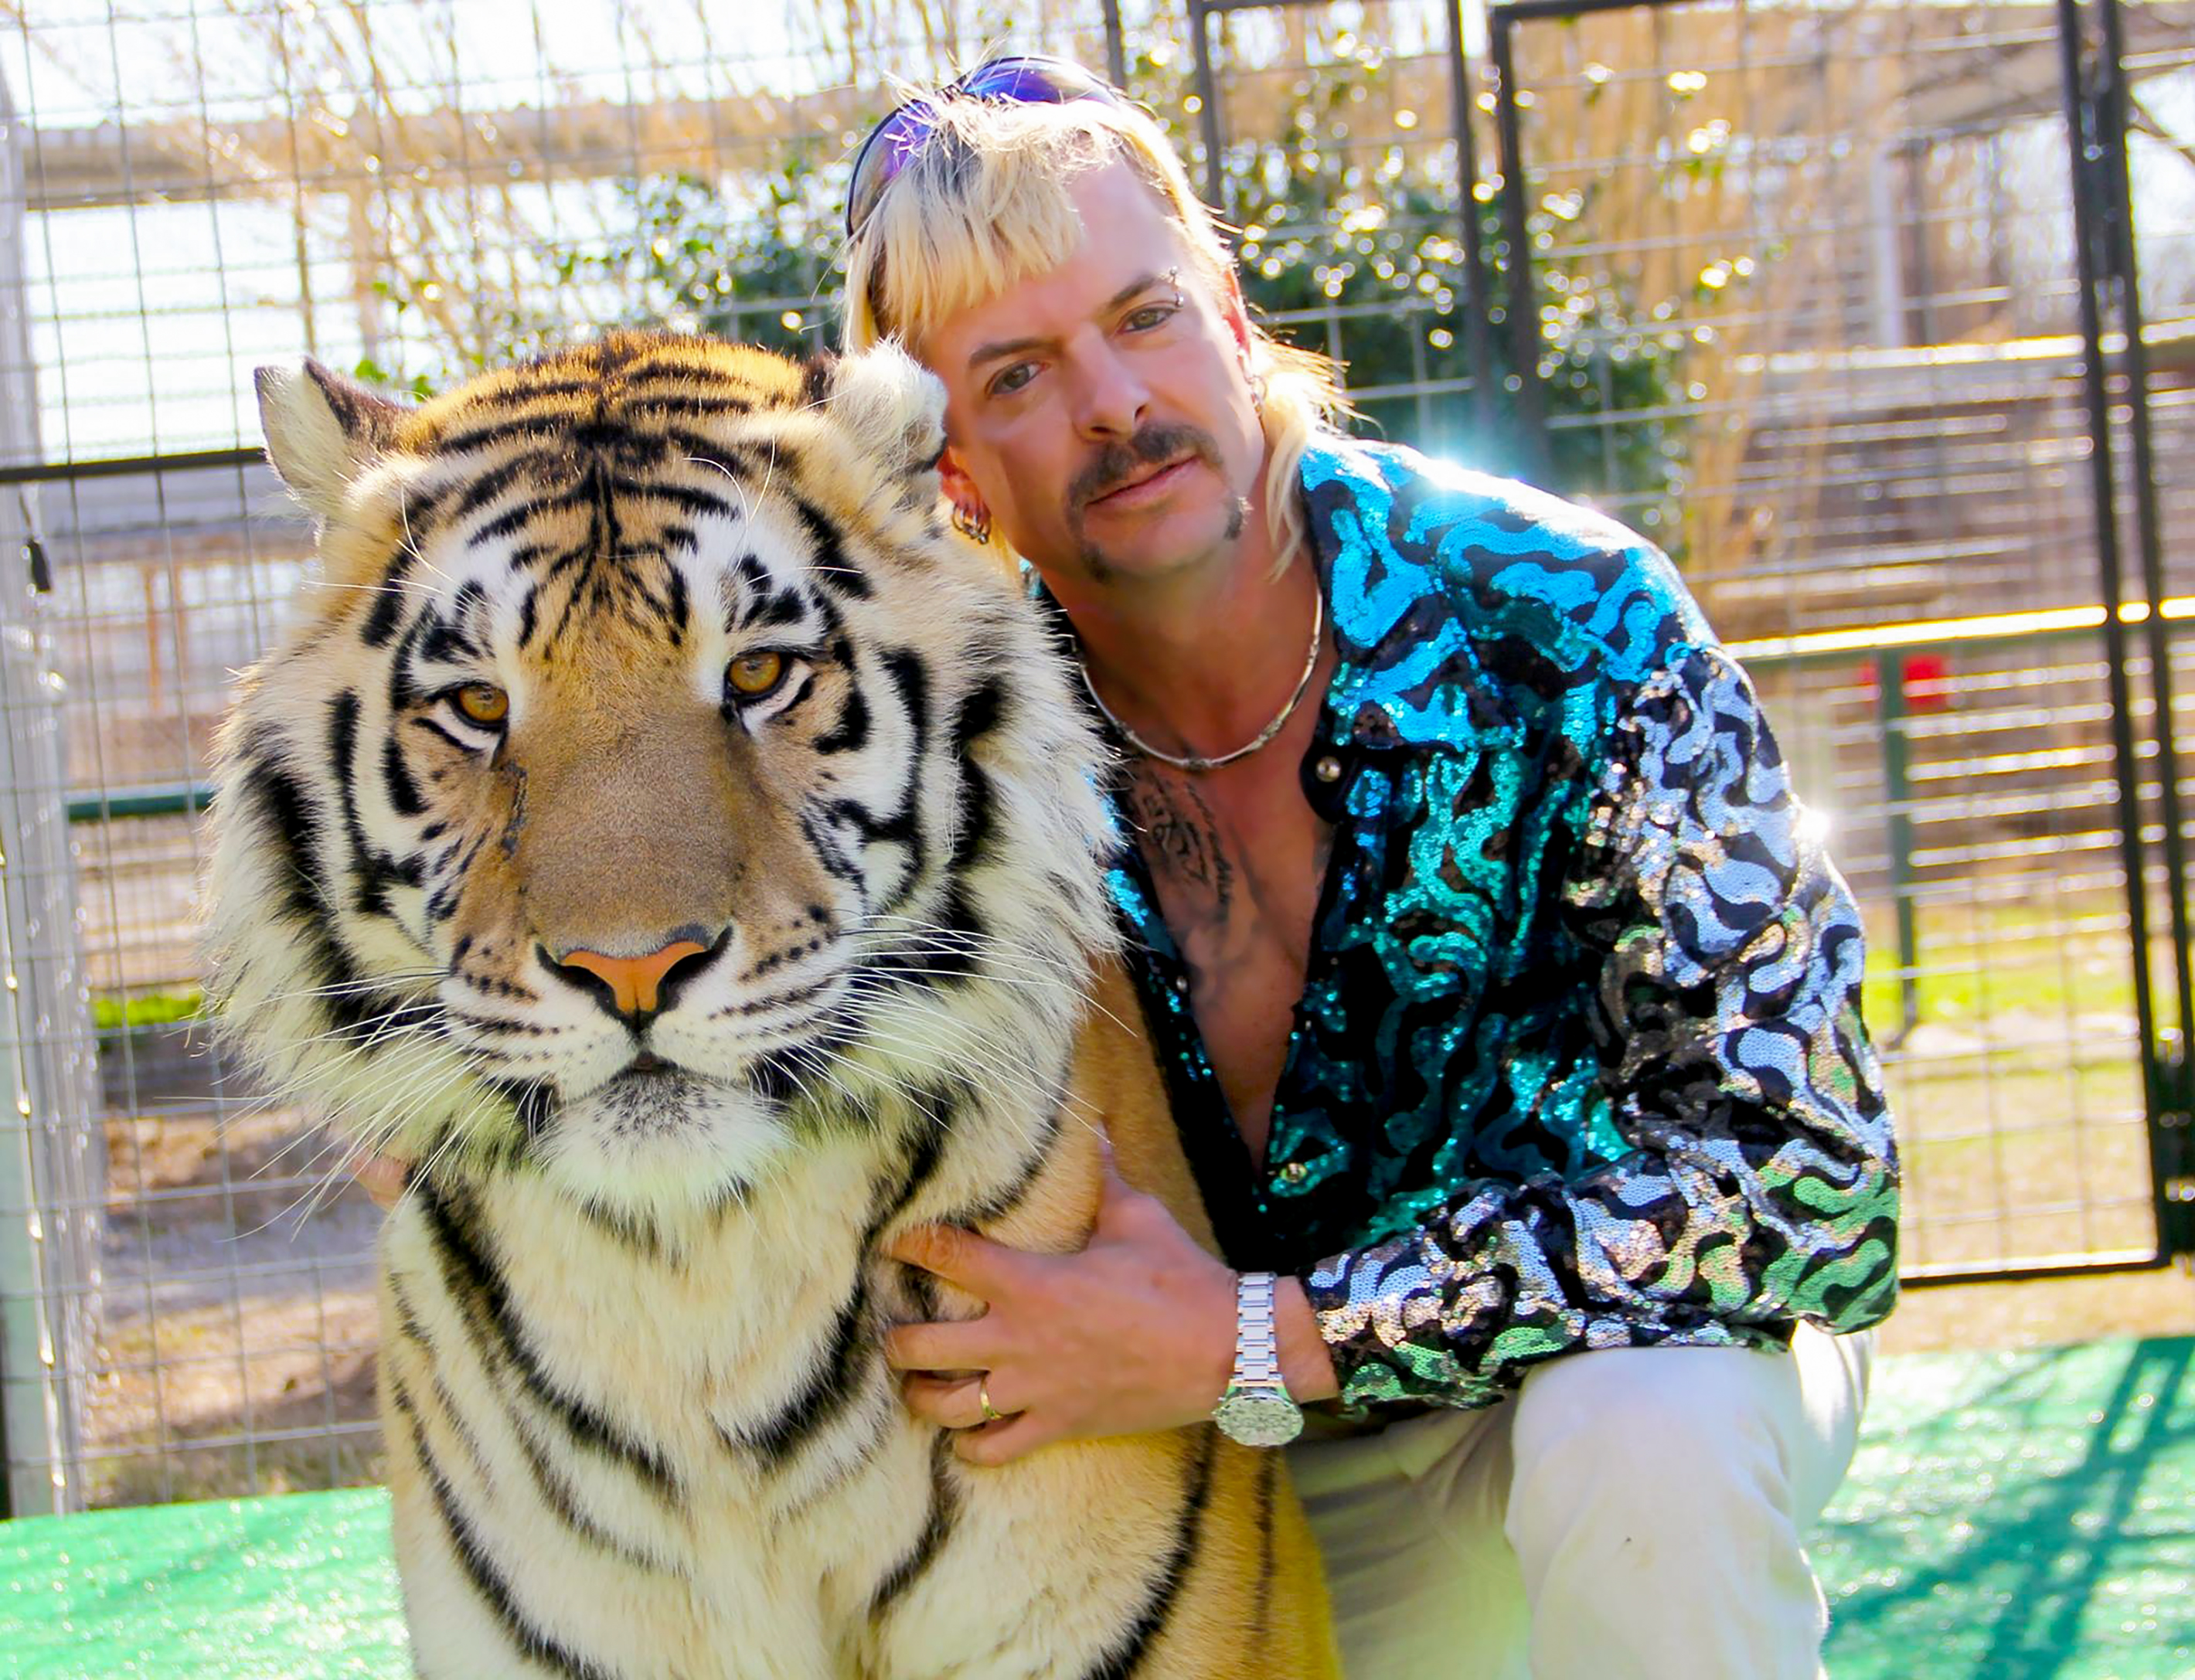 TV tonight Jailed Joe Exotic appears in archive